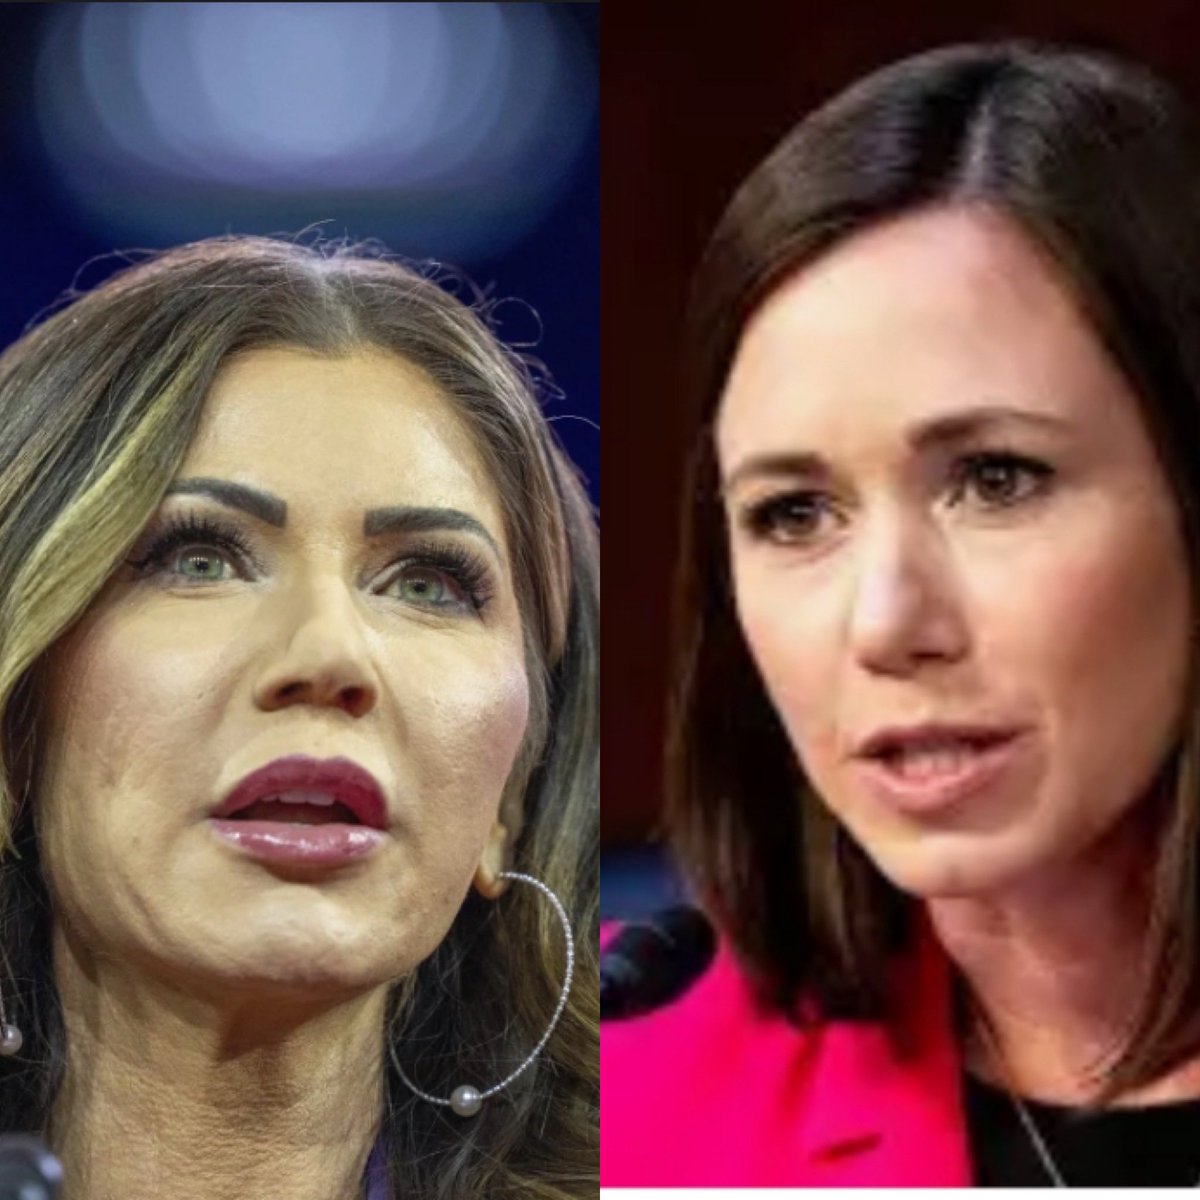 KRISTI NOEM vs KATIE BRITT

WHO wears CRAZY better? 

Kristi “Puppy Killer” Noem or
Katie “Blessed be the Fruit” Britt

Both are certifiable candidates for an insane asylum, but who is Queen of Whacked Town…? 🤔
#ProudBlue #DemVoice1 #VoteBIGblue